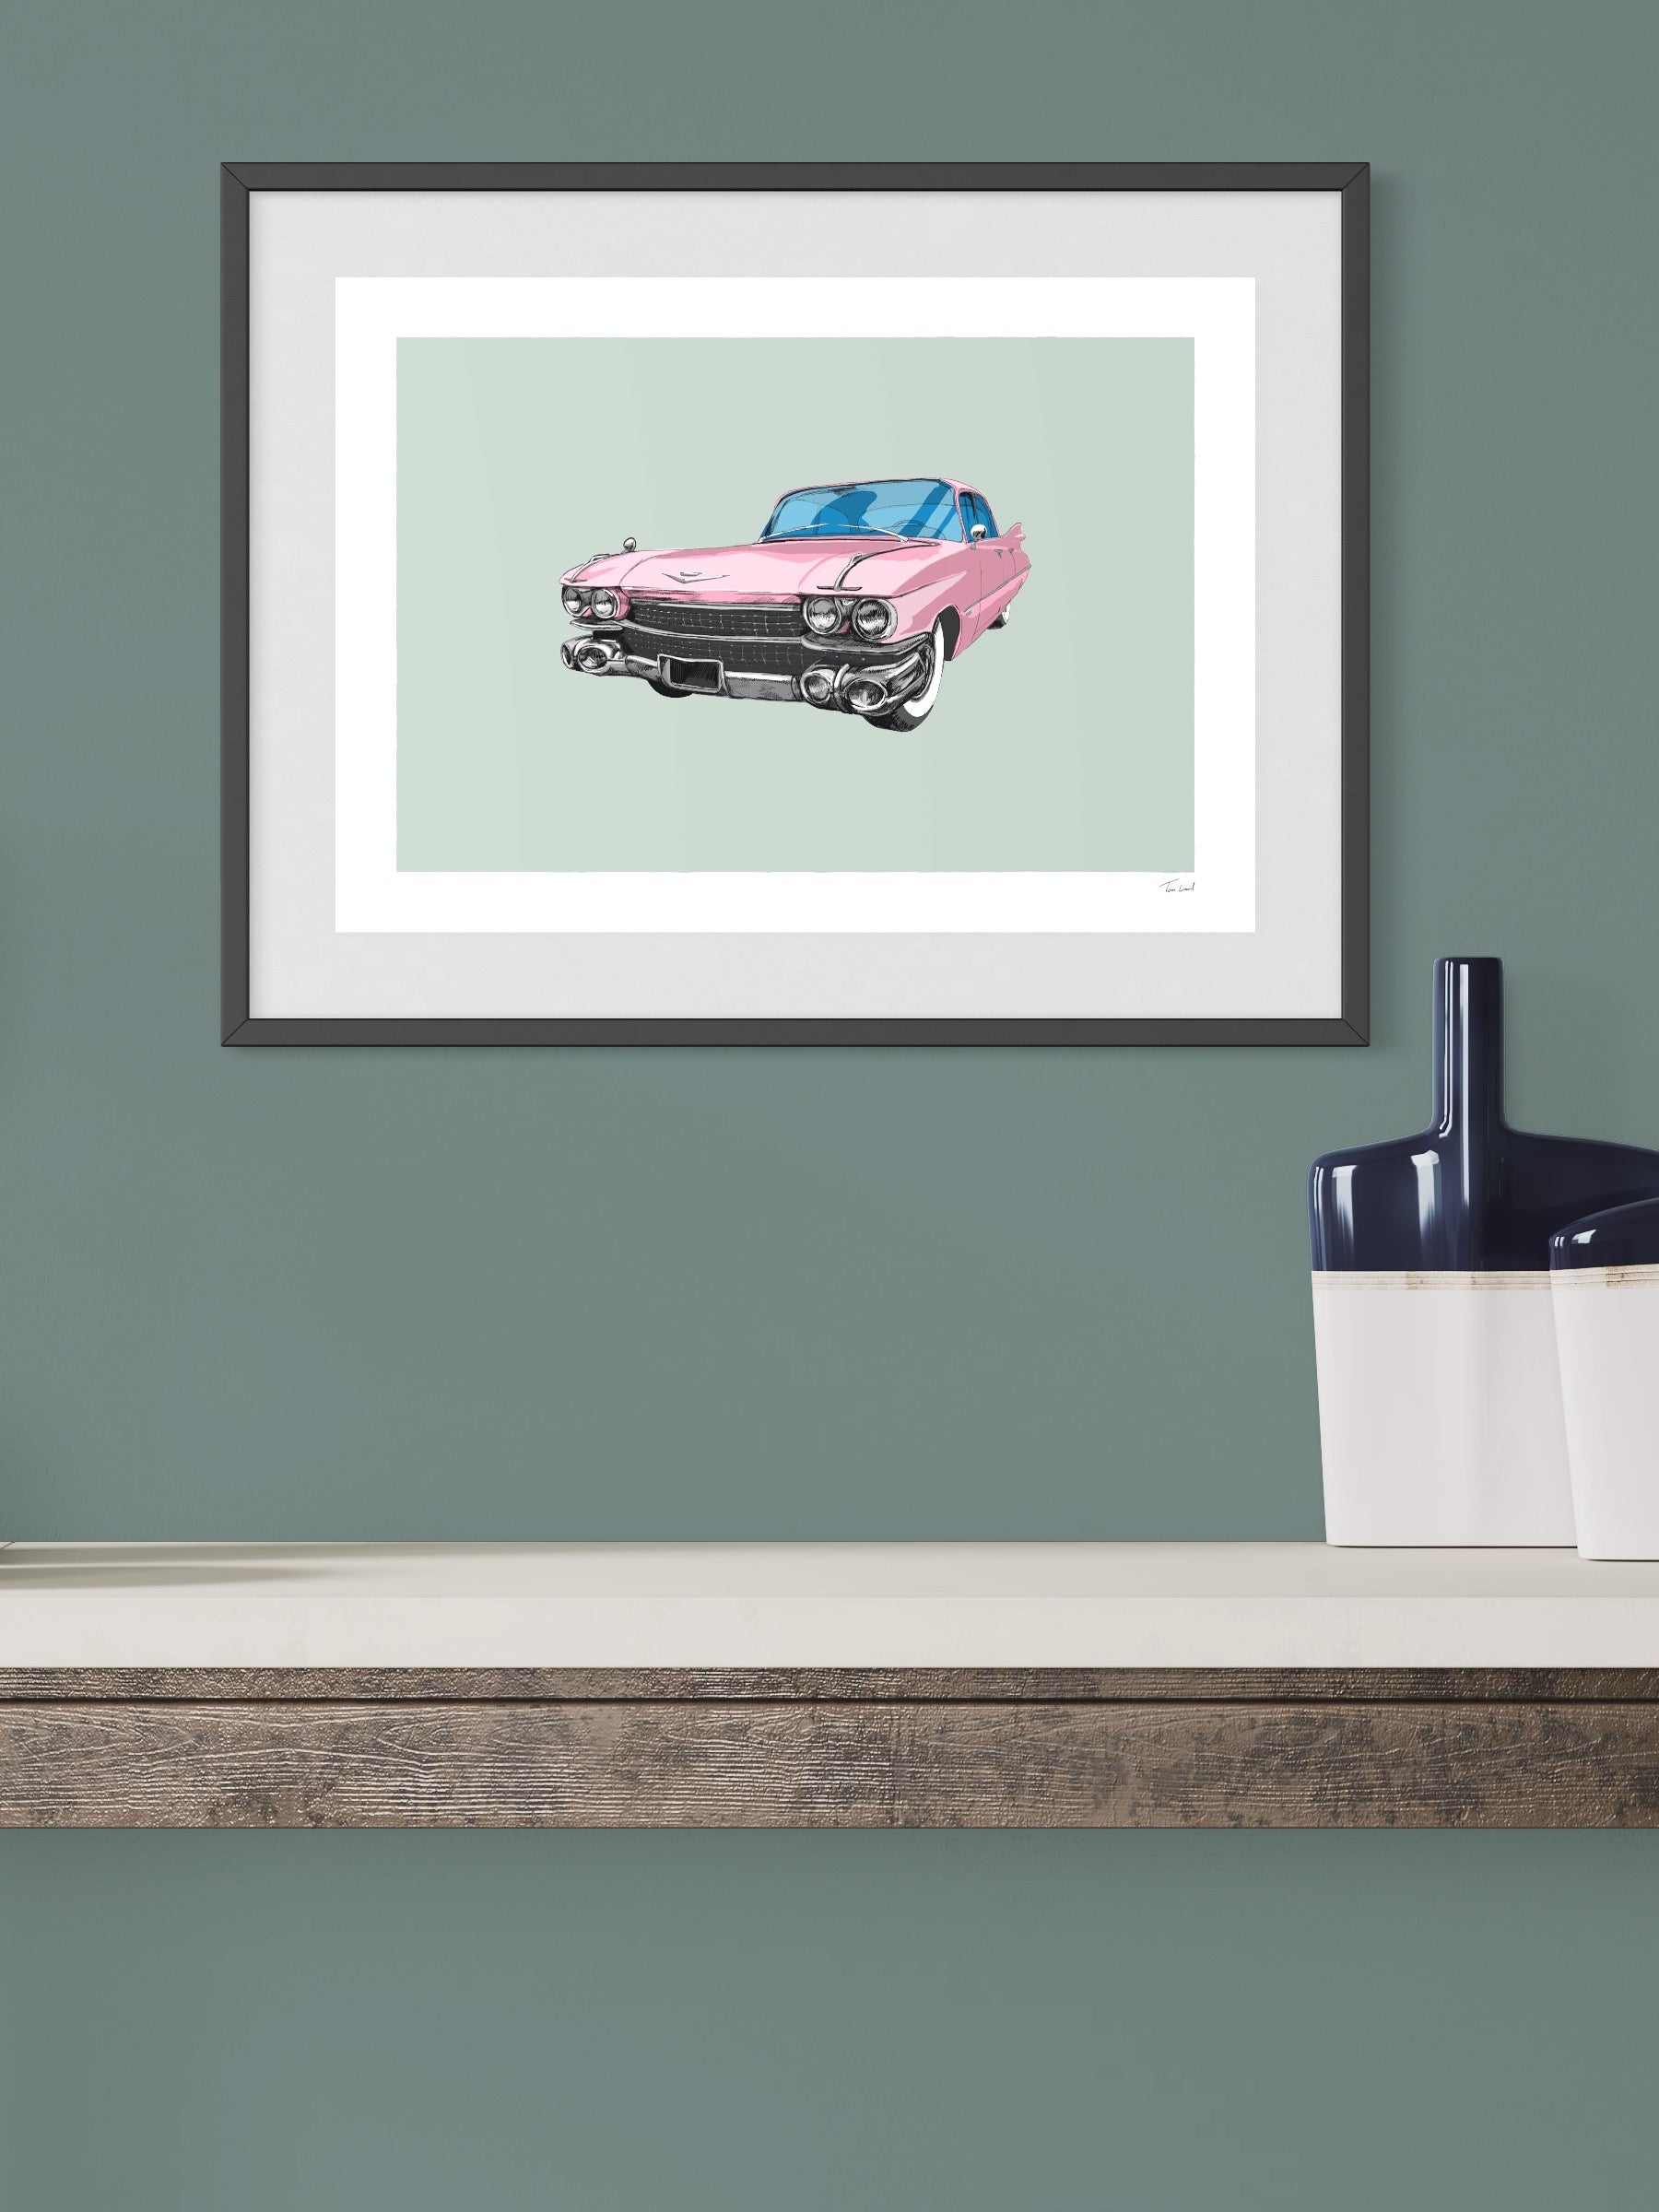 This image shows a giclee wall art print by Tom Laird Illustration of the American classic car, the Cadillac, framed in a beautiful living room with tasteful modern home decor. This art print of a pink example is available from Tom Laird Illustration in a variety of sizes.